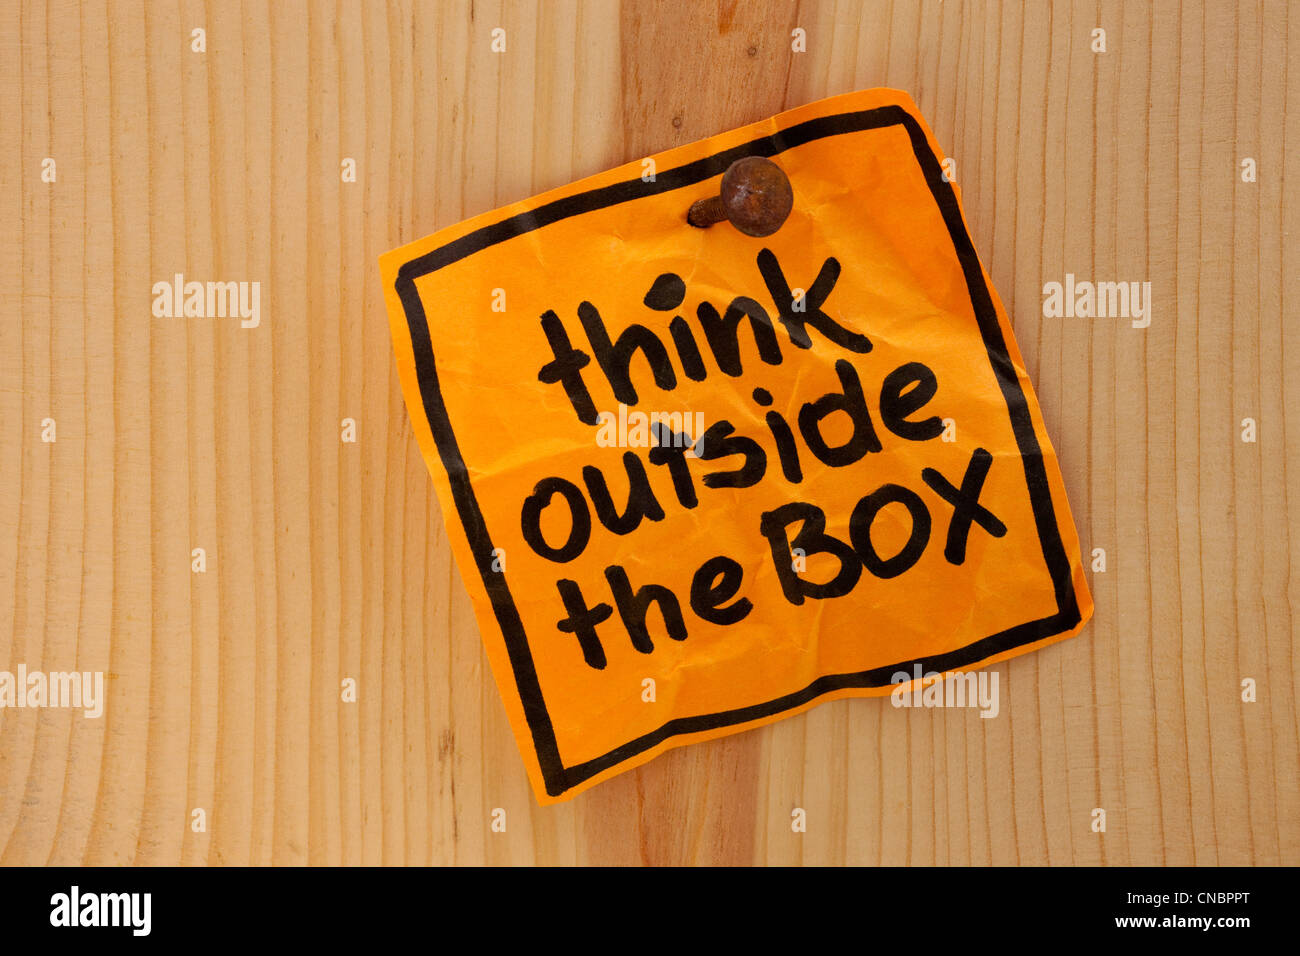 think outside the box - bright orange reminder note nailed to a wooden wall Stock Photo